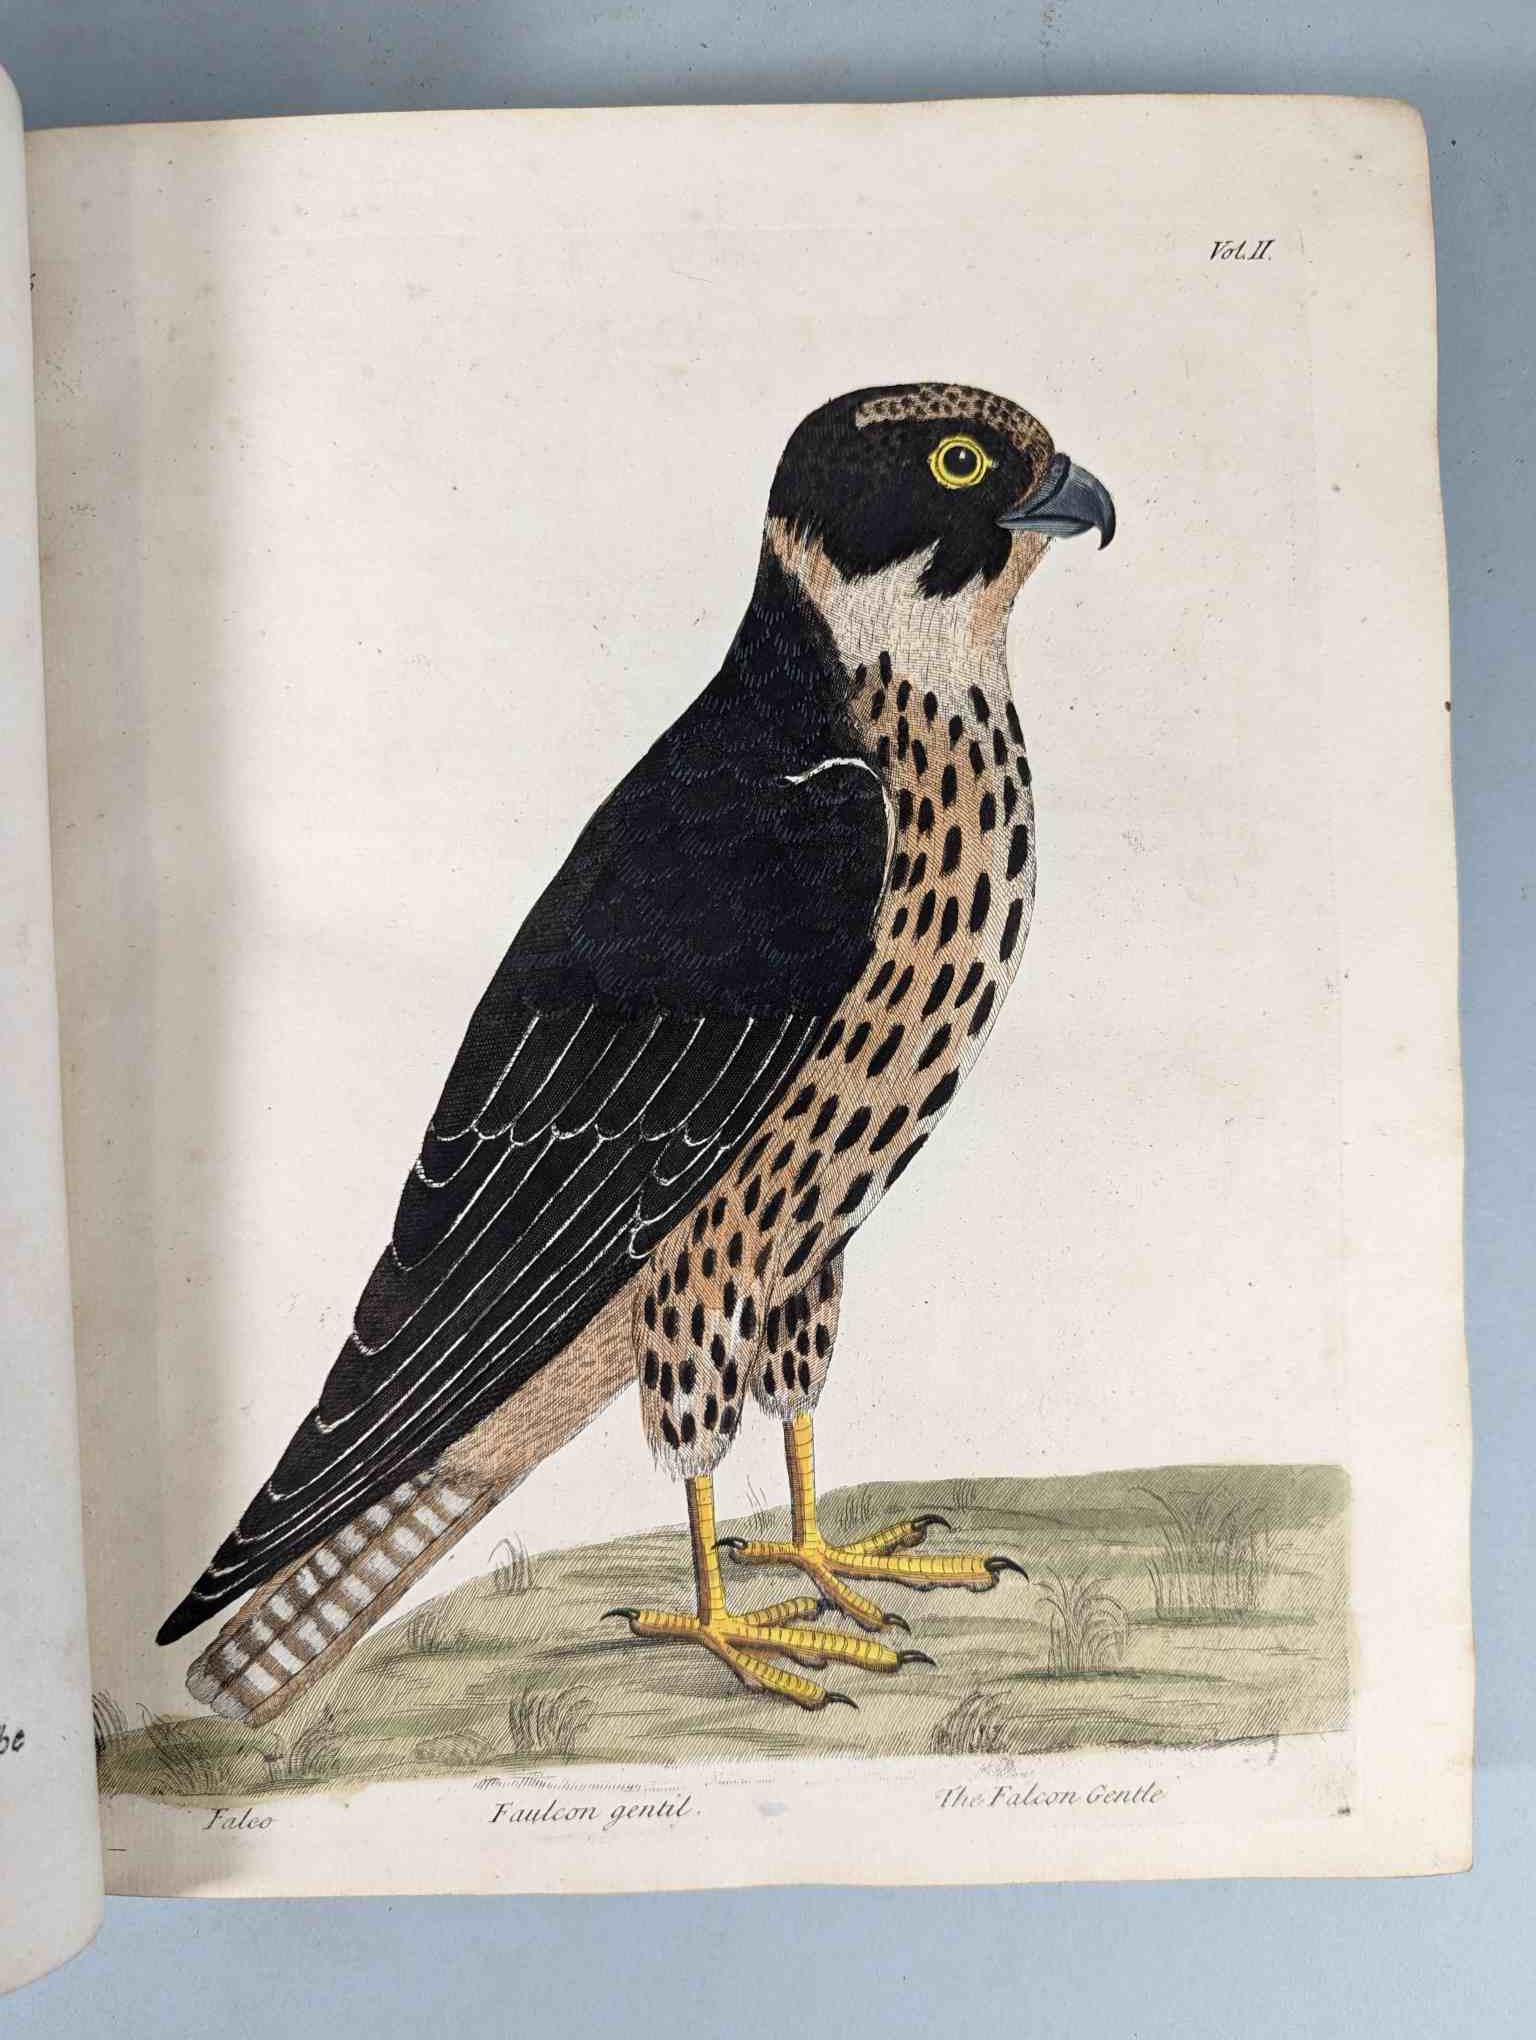 ALBIN, Eleazar. A Natural History of Birds, to which are added, Notes and Observations by W. - Image 110 of 208